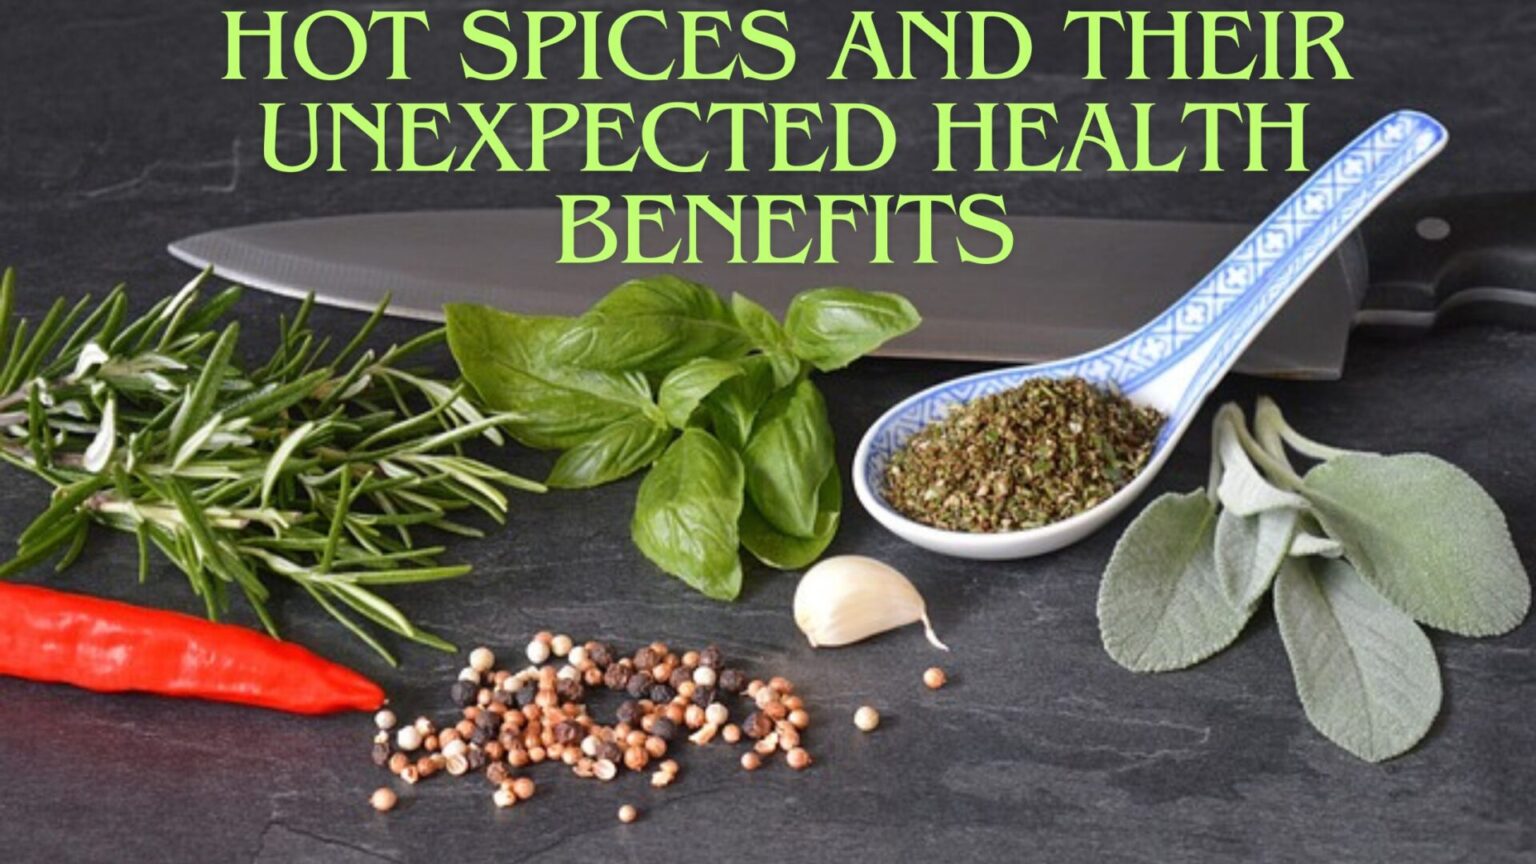 Hot Spices and Their Unexpected Health Benefits